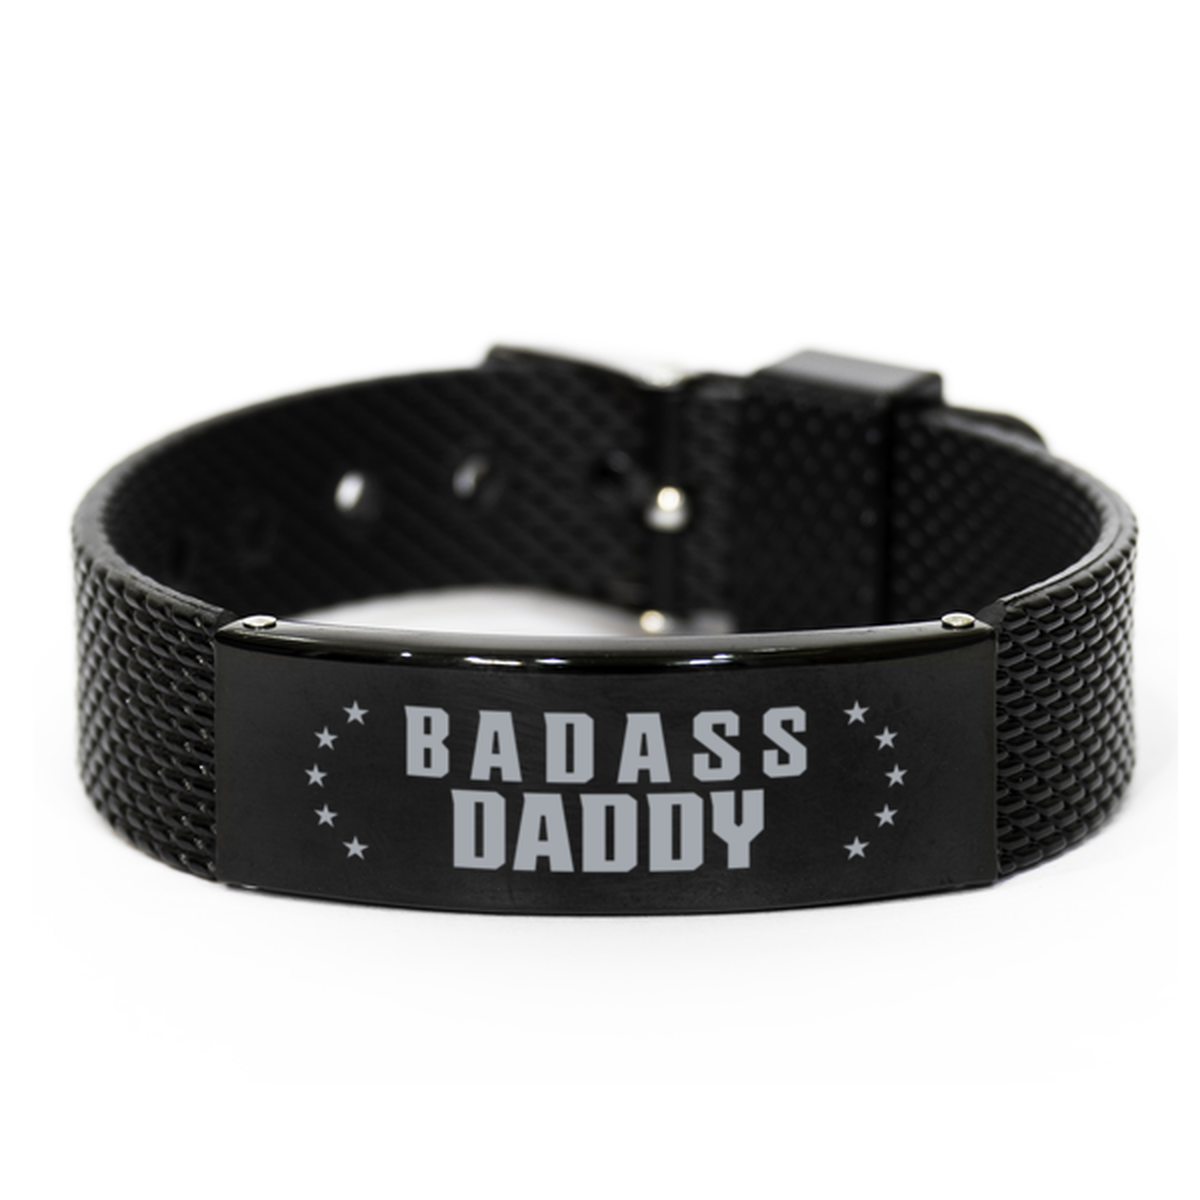 Daddy Black Shark Mesh Bracelet, Badass Daddy, Funny Family Gifts For Daddy From Son Daughter